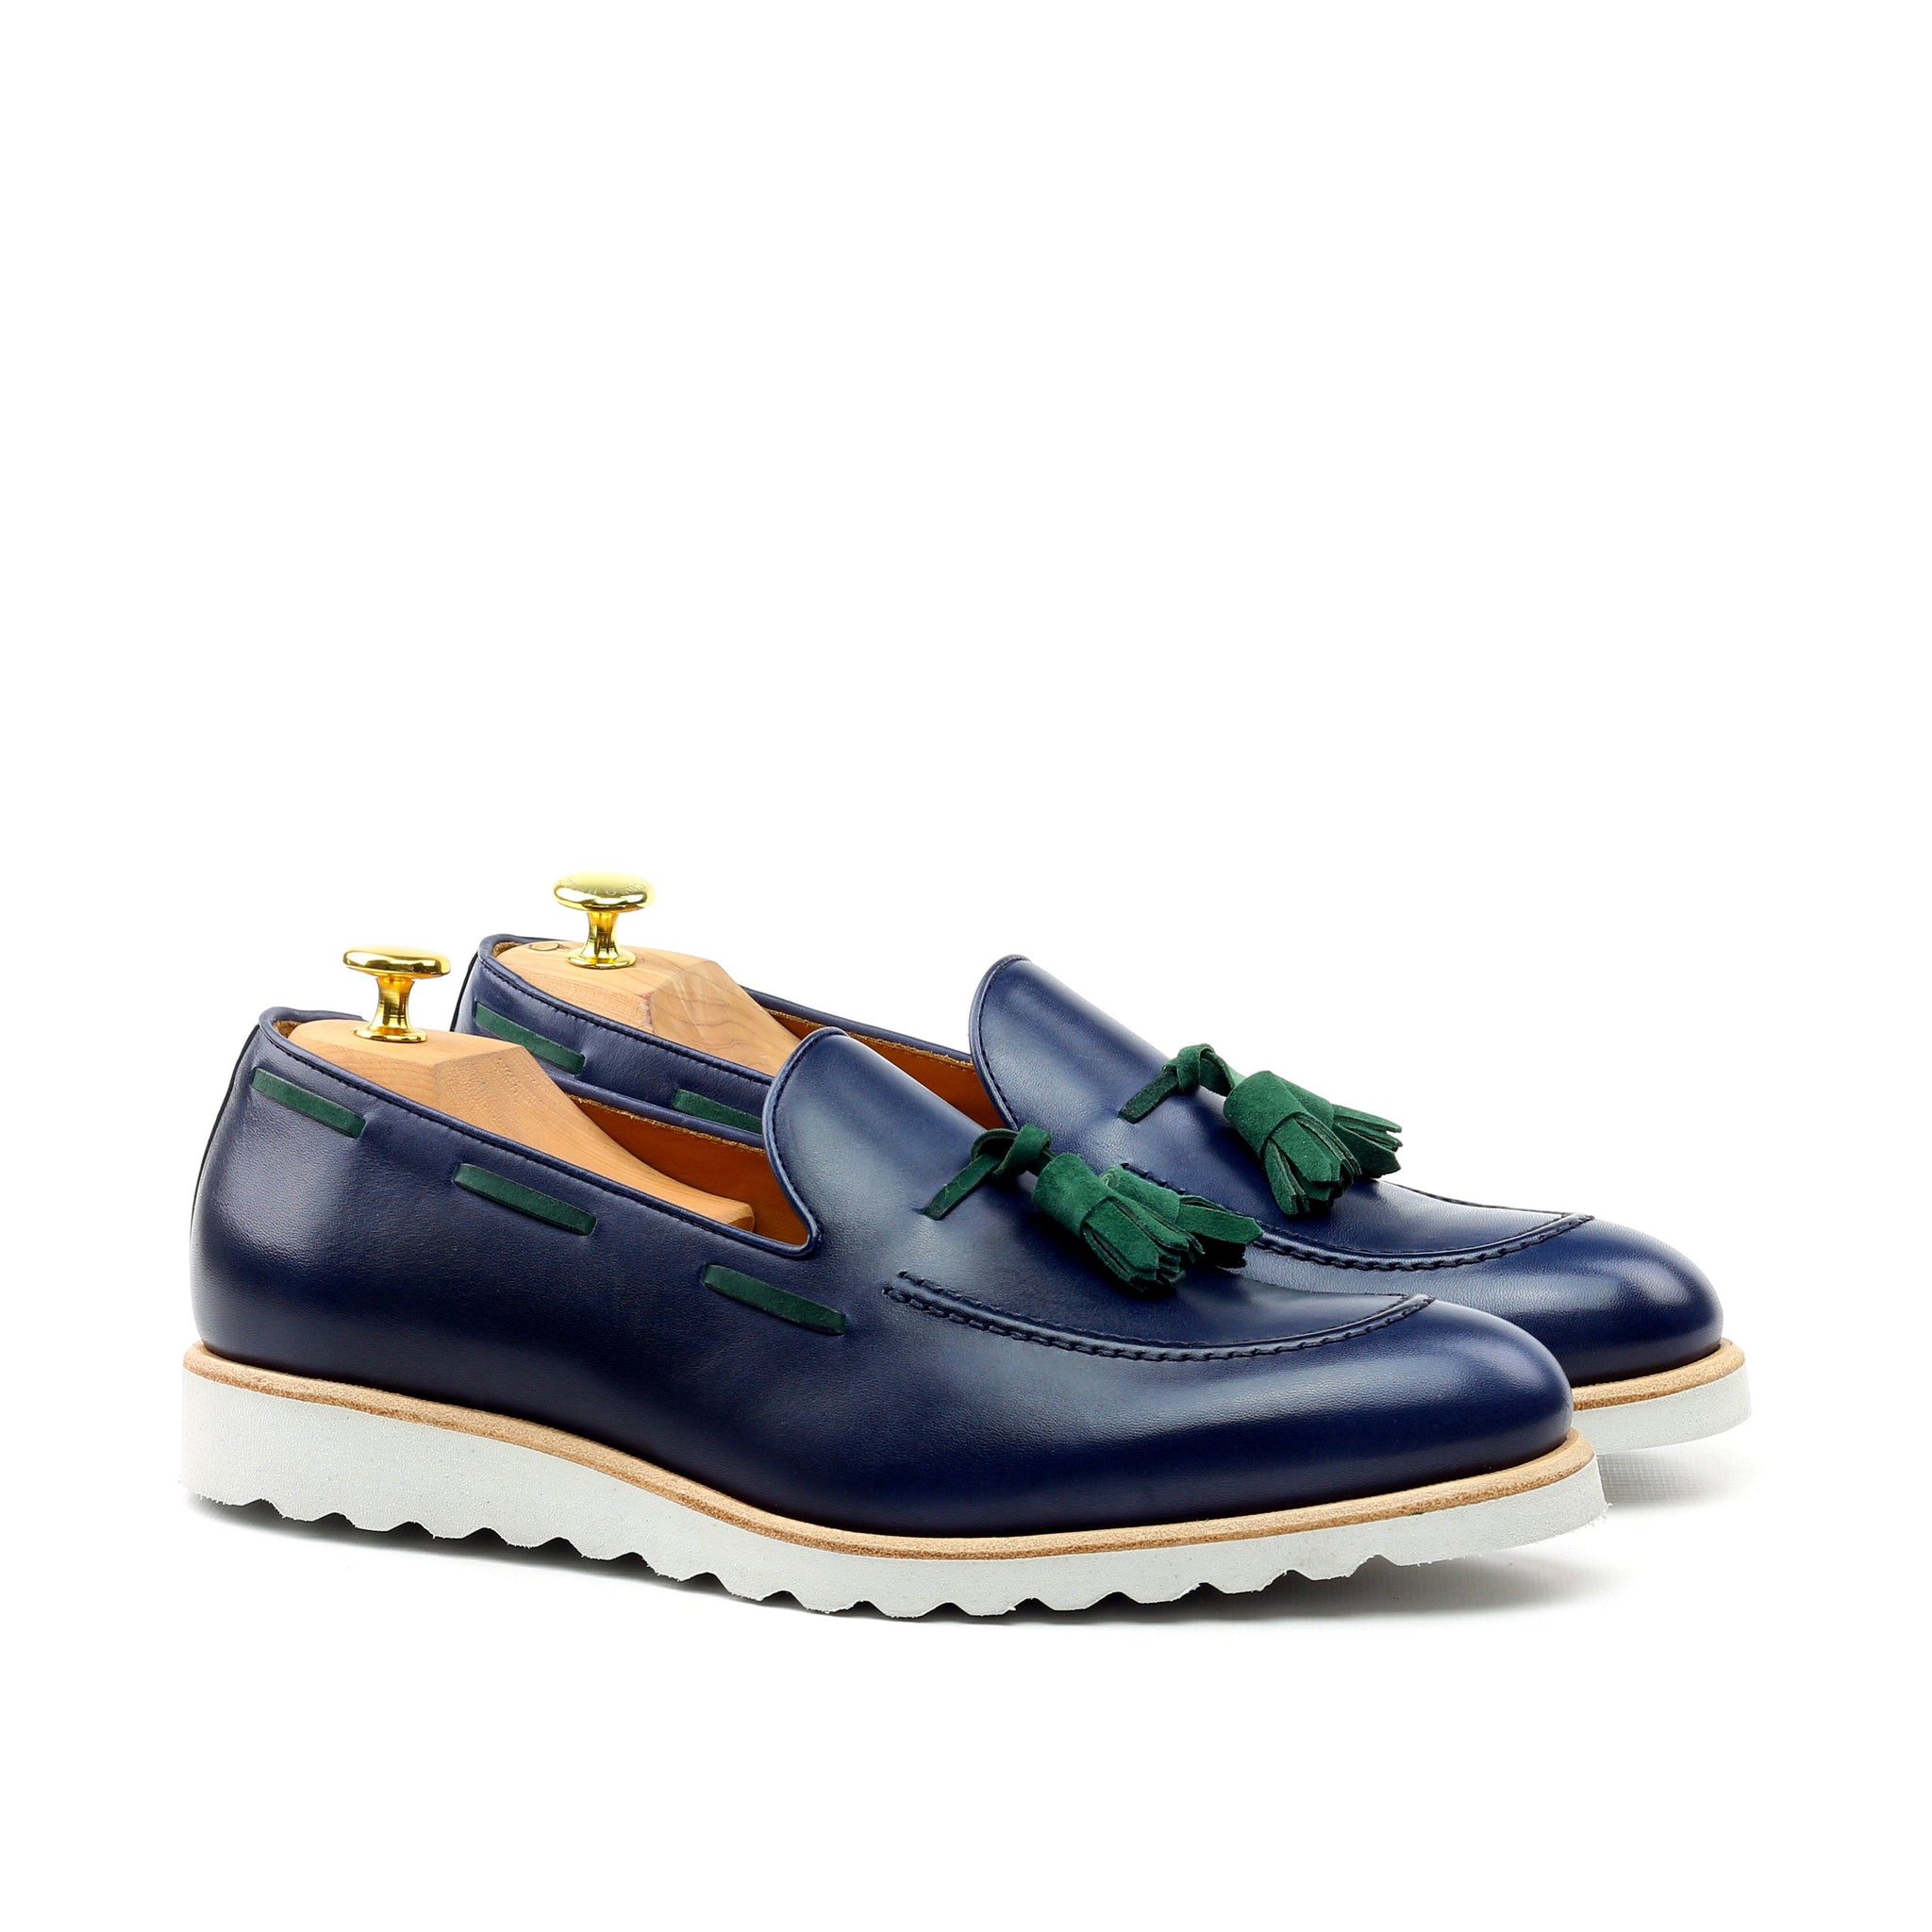 Unique Handcrafted Navy Blue Box Calf Loafer w/ Sport Wedge Sole